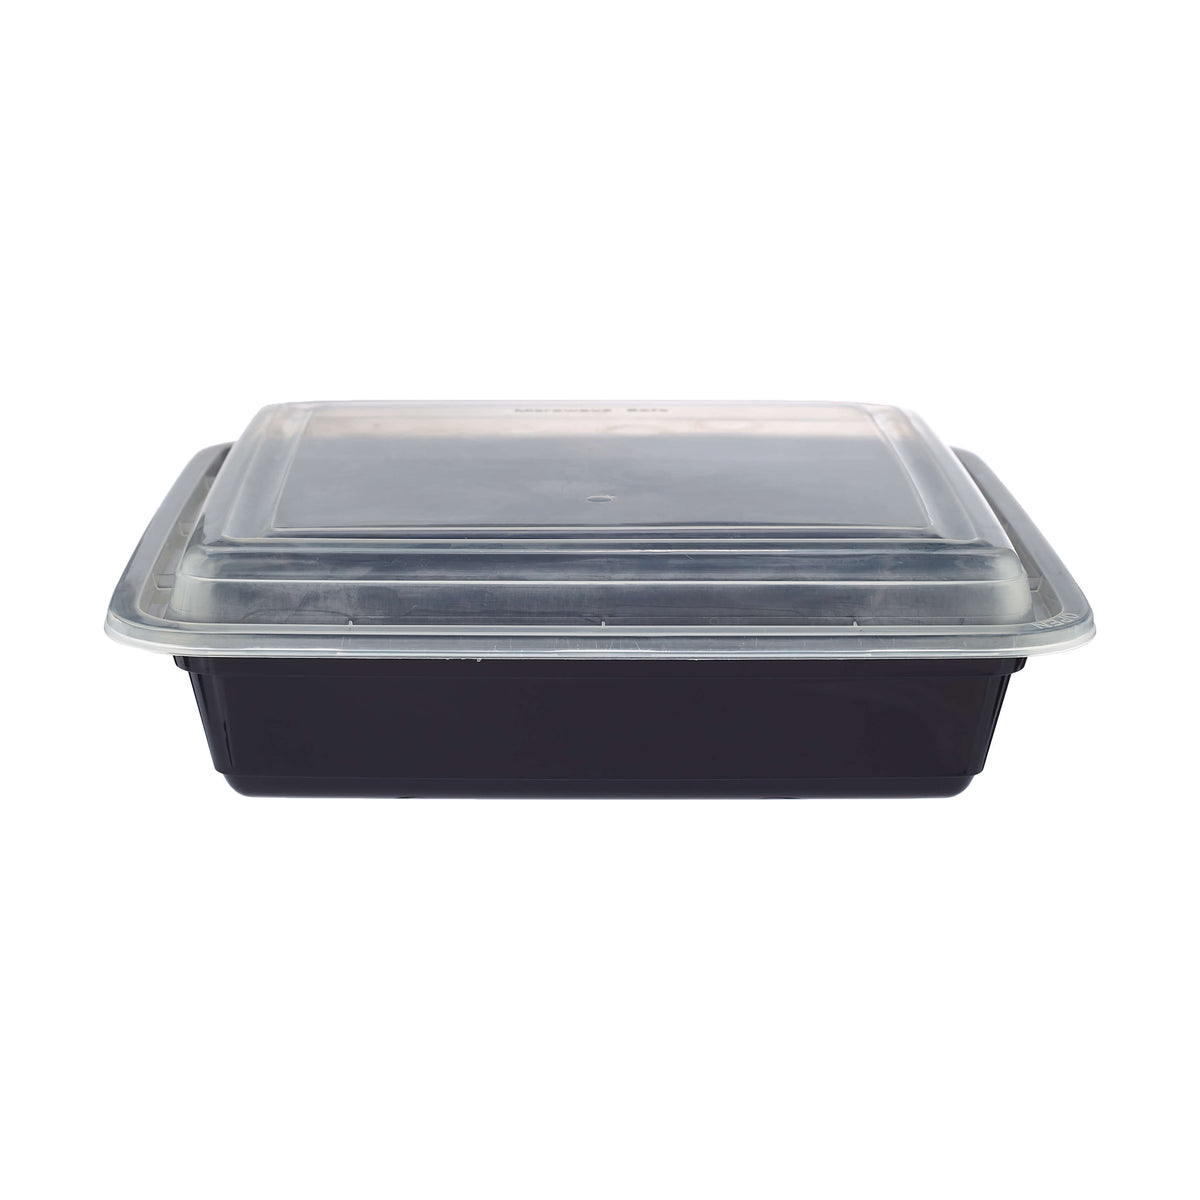 Black Base Rectangular Container With Lid 